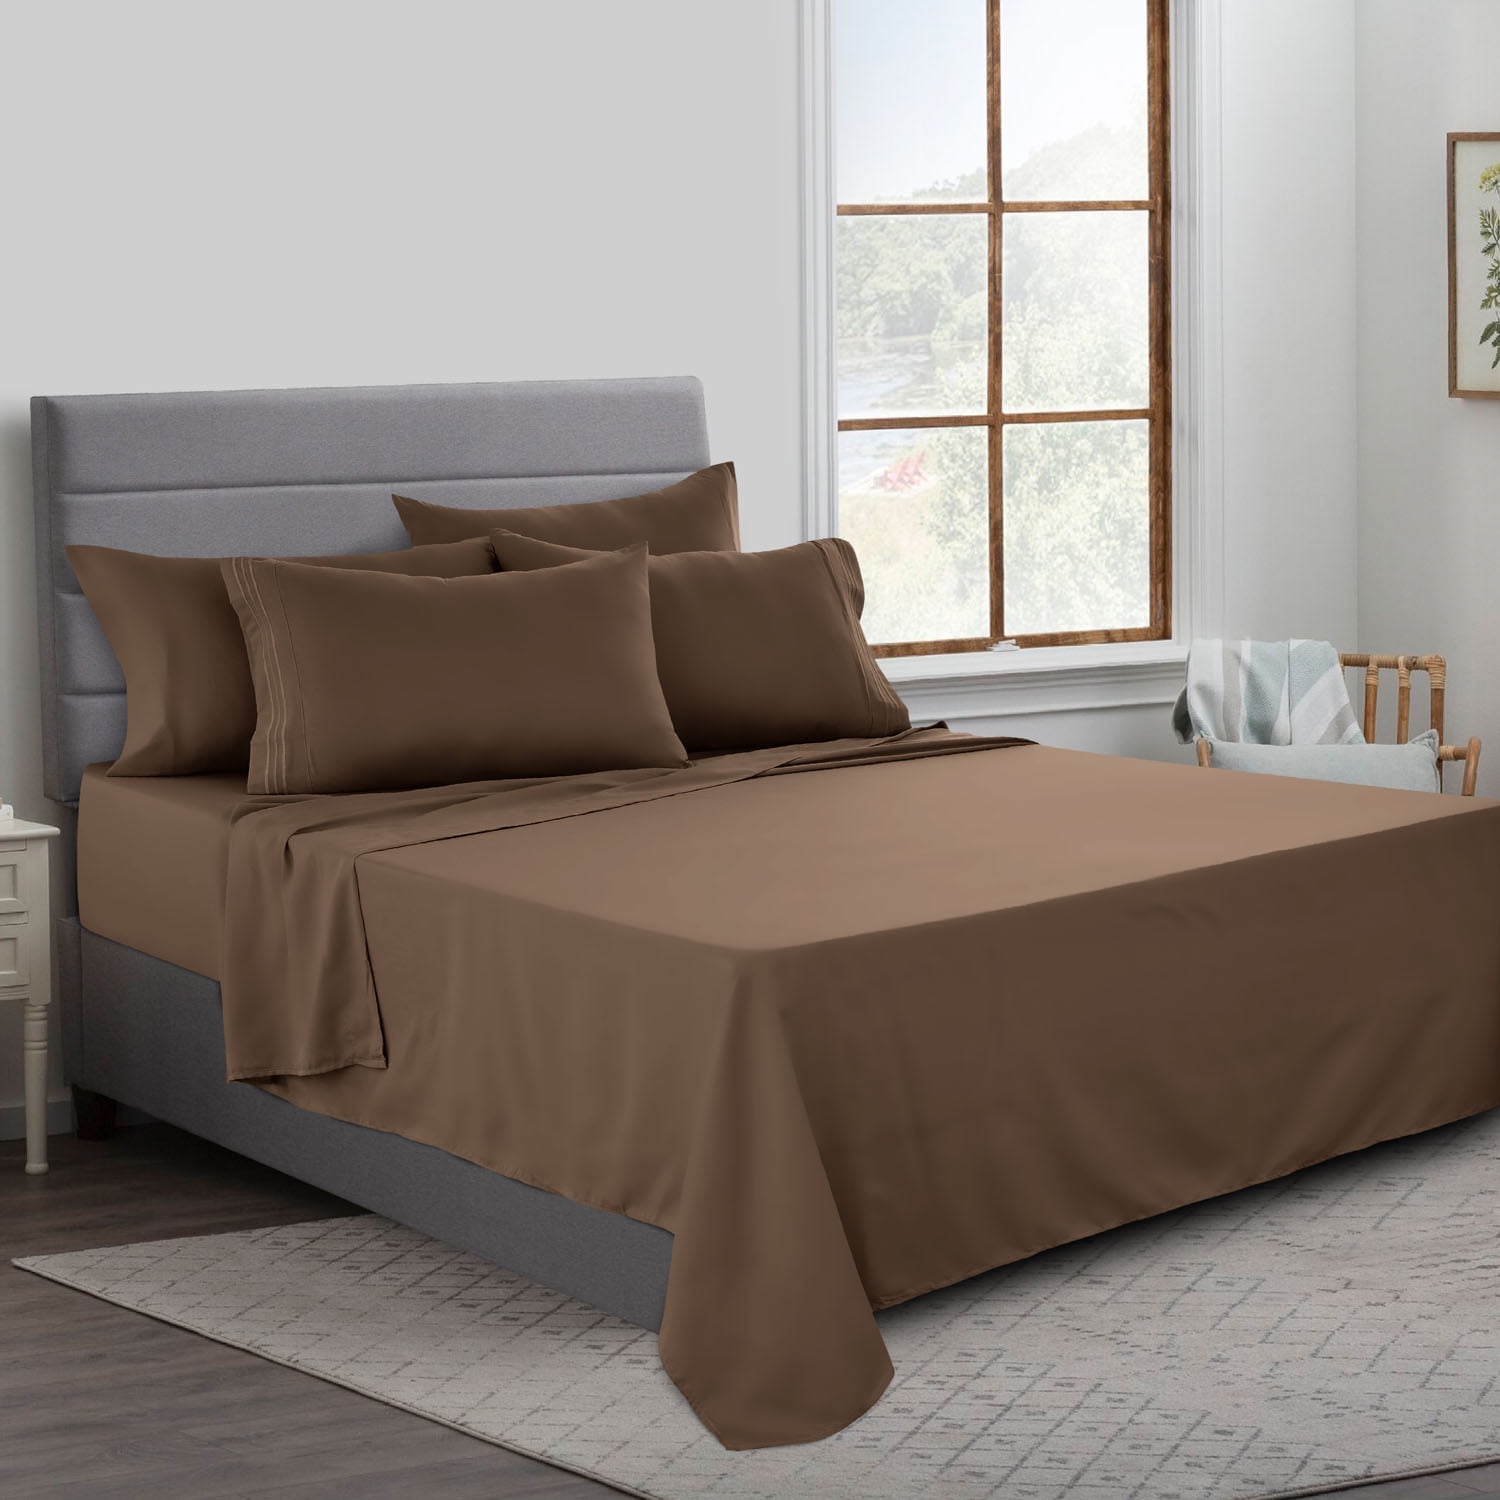 Details about   Deep Pocket Bedding Item 1000 TC Egyptian Cotton US Size & Chocolate Solid 